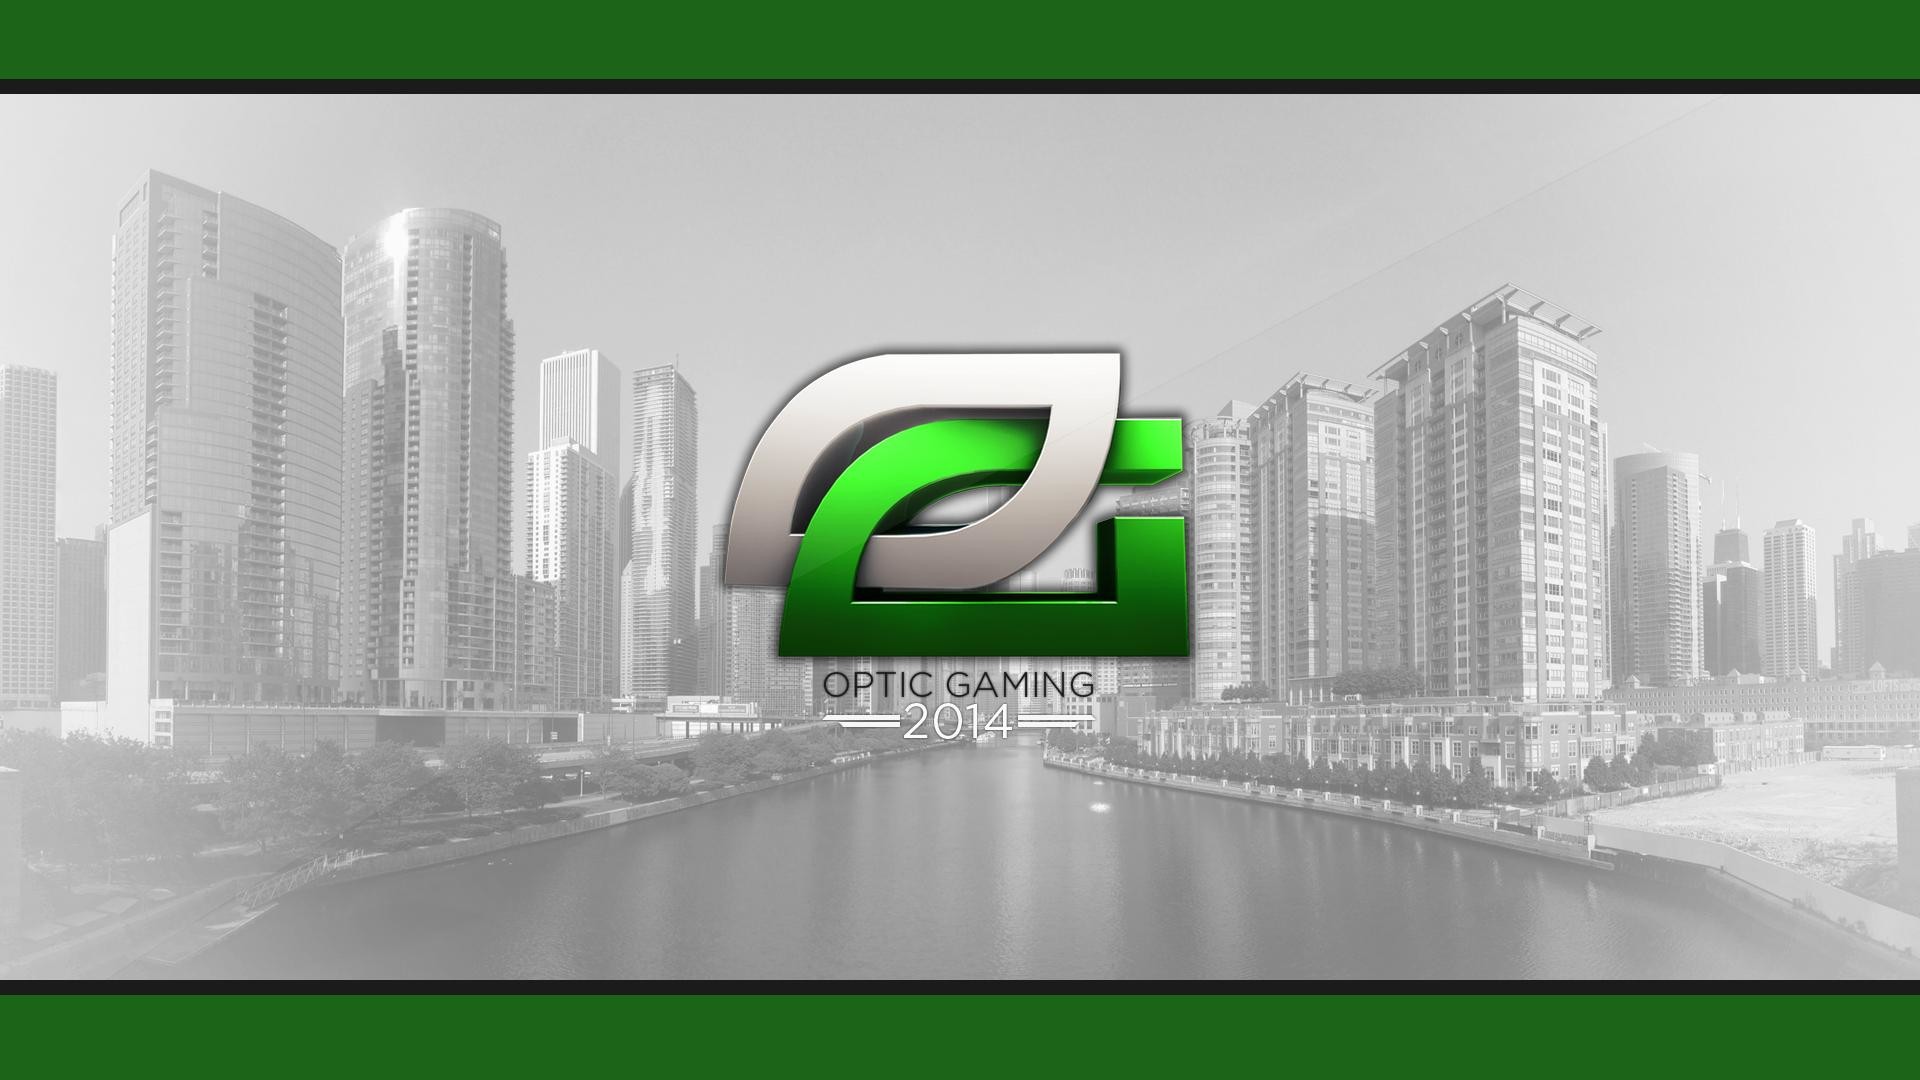 Optic Gaming Backgrounds Wallpapers, Backgrounds, Images, Art .